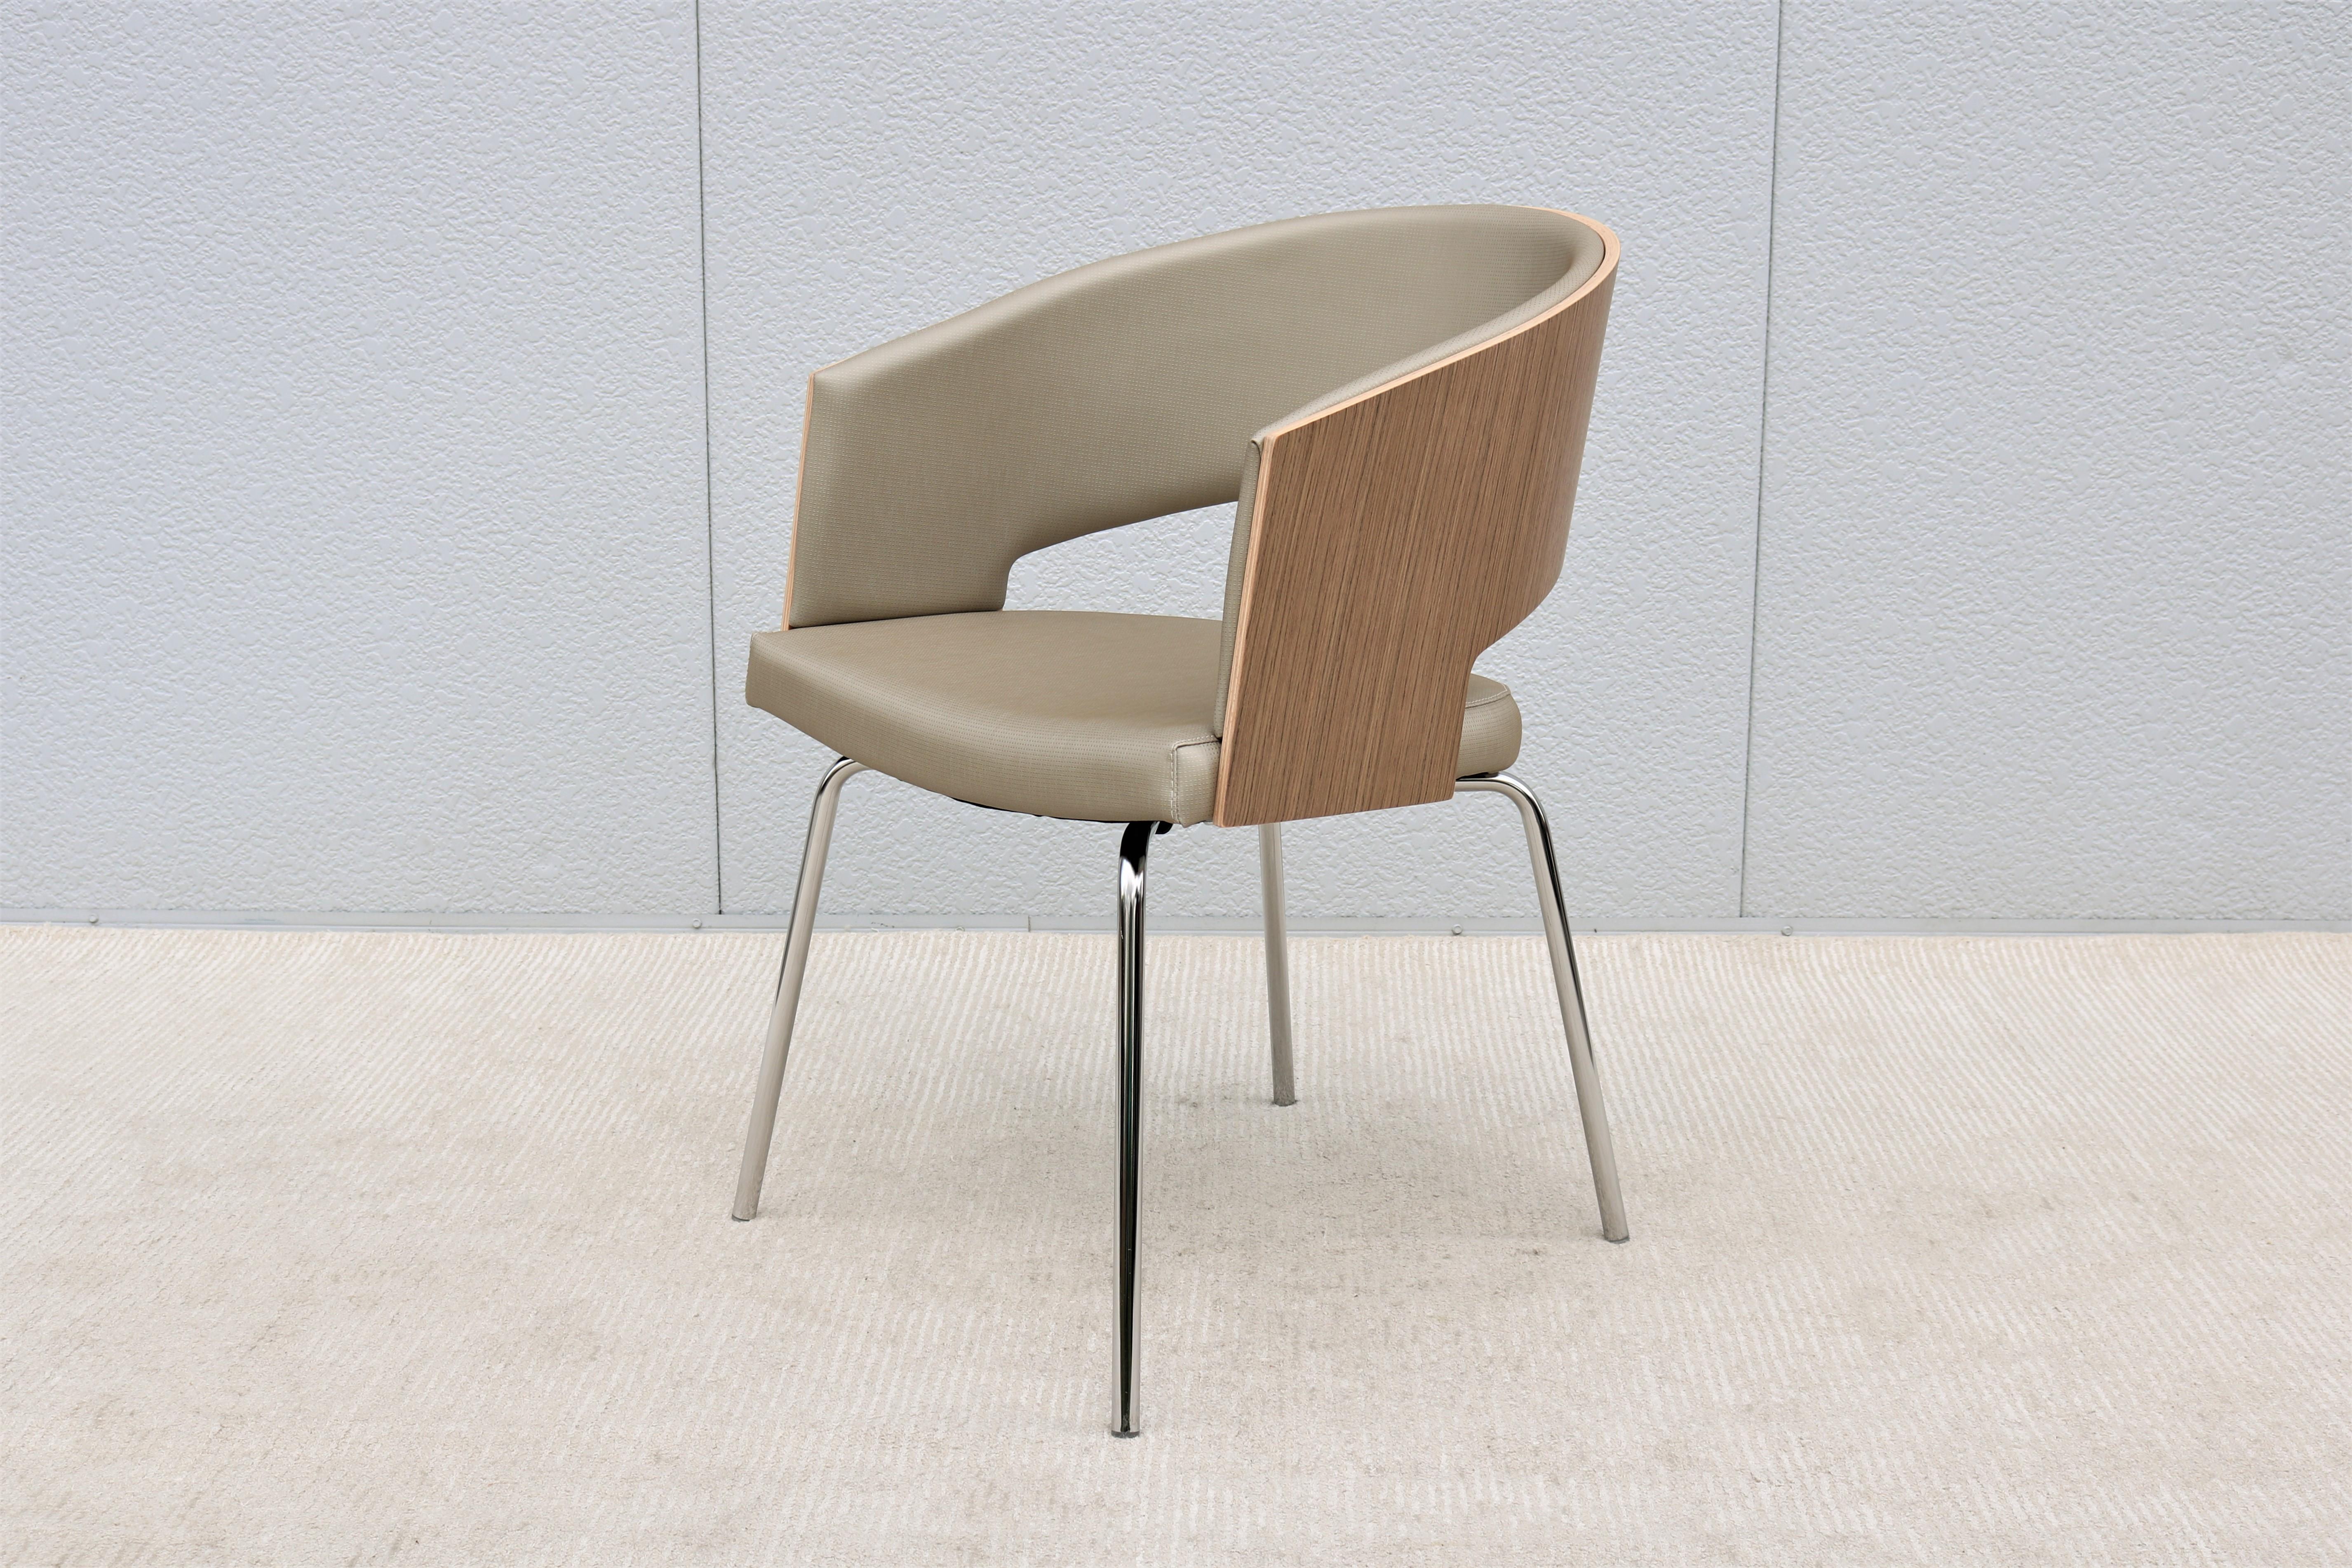 Steel Contemporary Modern Source Botte Multiuse Dining Chair Brand New, 7 Available For Sale